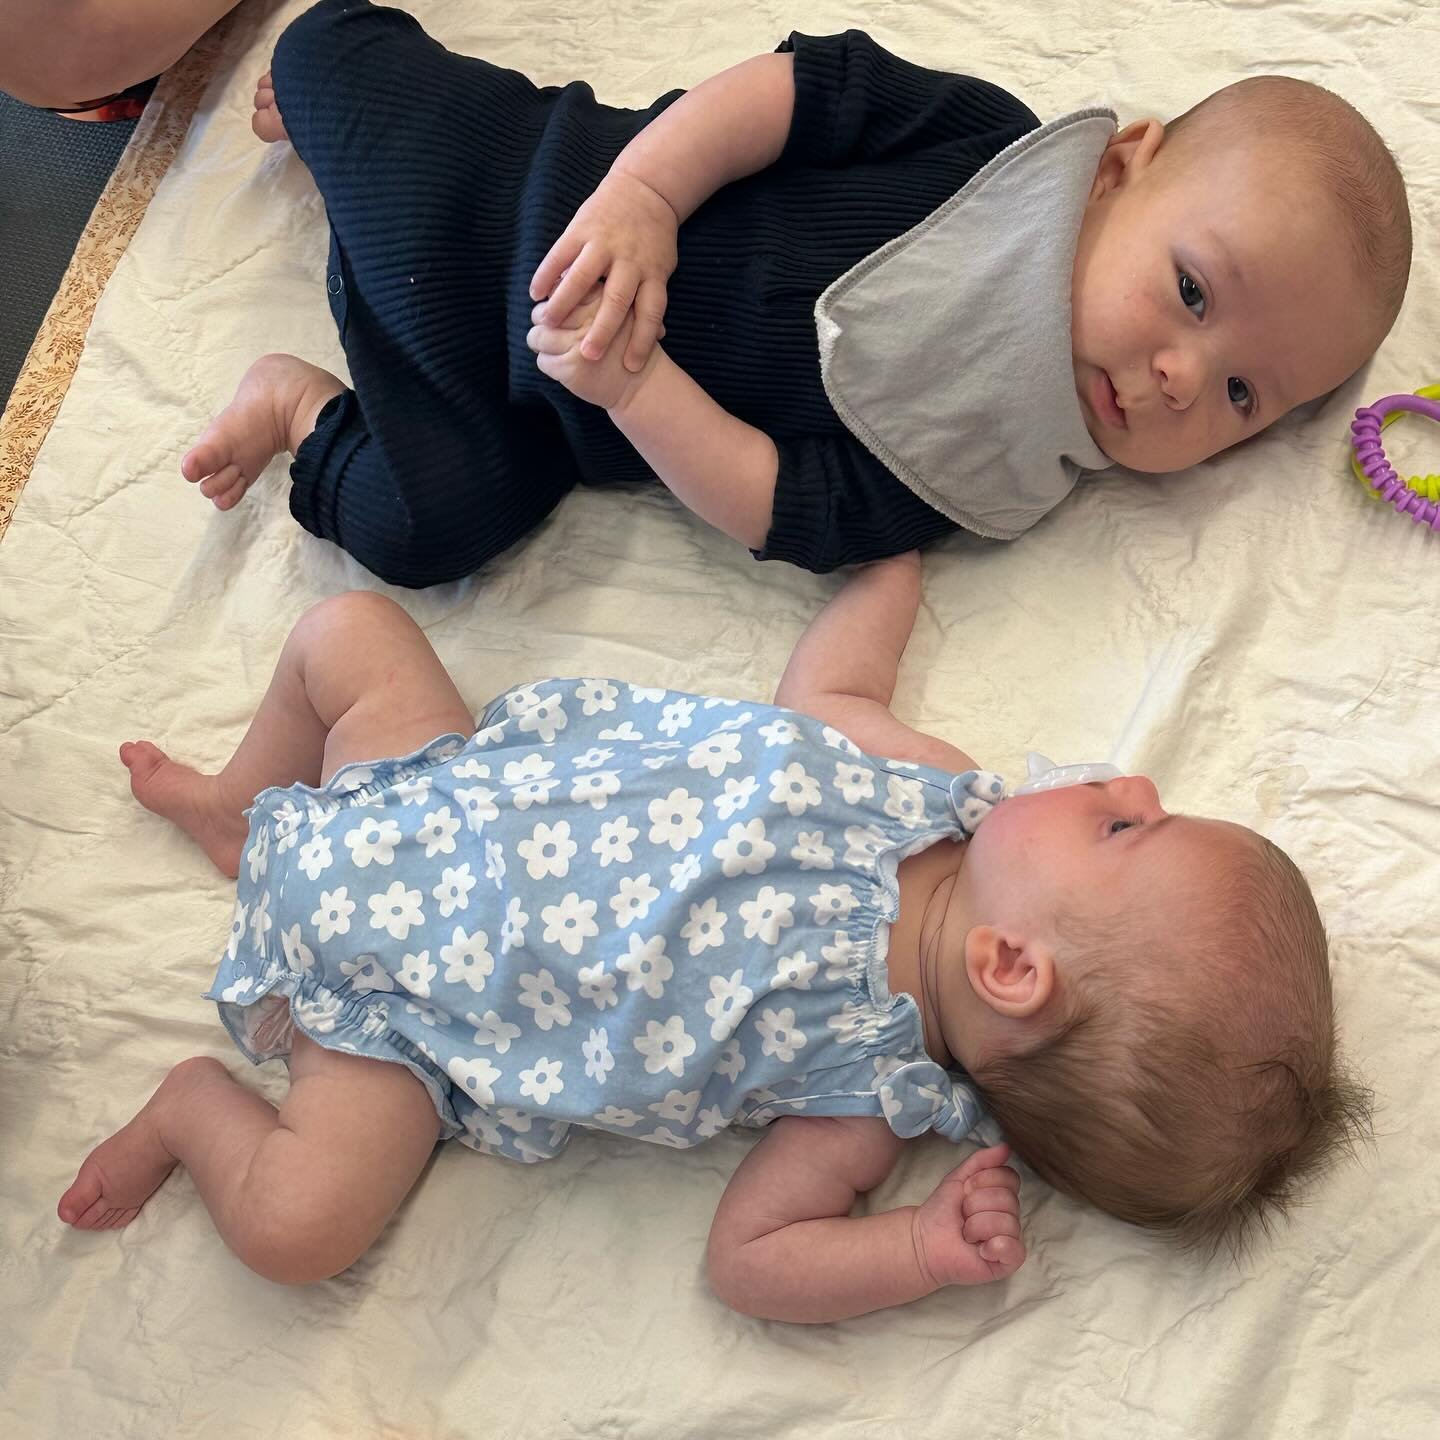 When siblings become tot friends🥰 Swipe to see the big sibs!

It is so amazing to watch your tots, families and friendships blossom! Monday, we have another Tiny Toes &amp; Tummytime 3-week mini series starting for our little sibs at 10a. We offer o